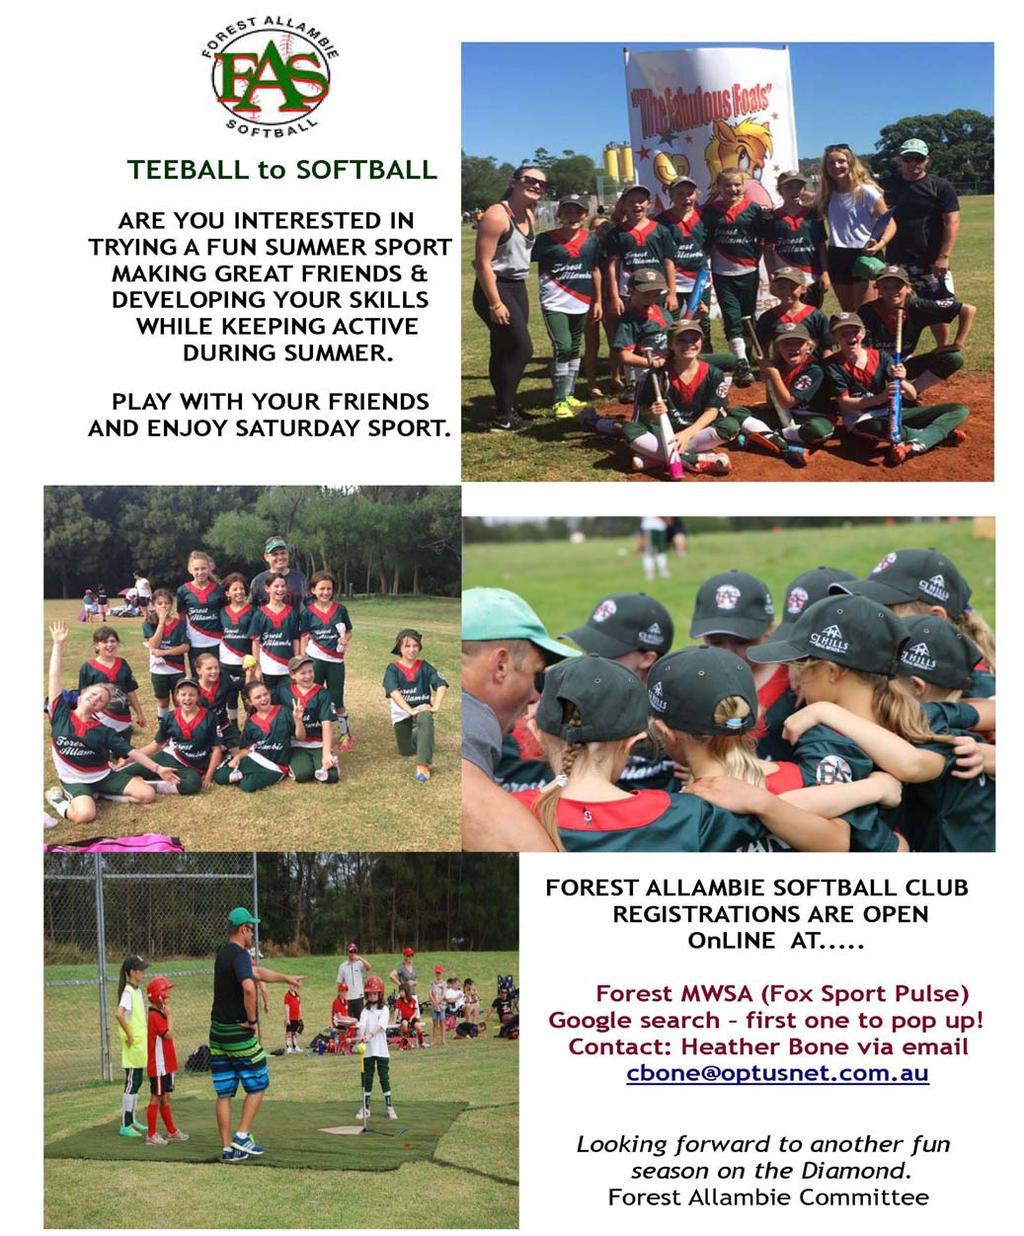 PAGE 7 KINDERGARTEN TO YEAR 1 COME AND PLAY TEE BALL Forest Allambie Softball is the club all the Belrose girls play for. They are now recruiting for a Tee Ball to Softball team.